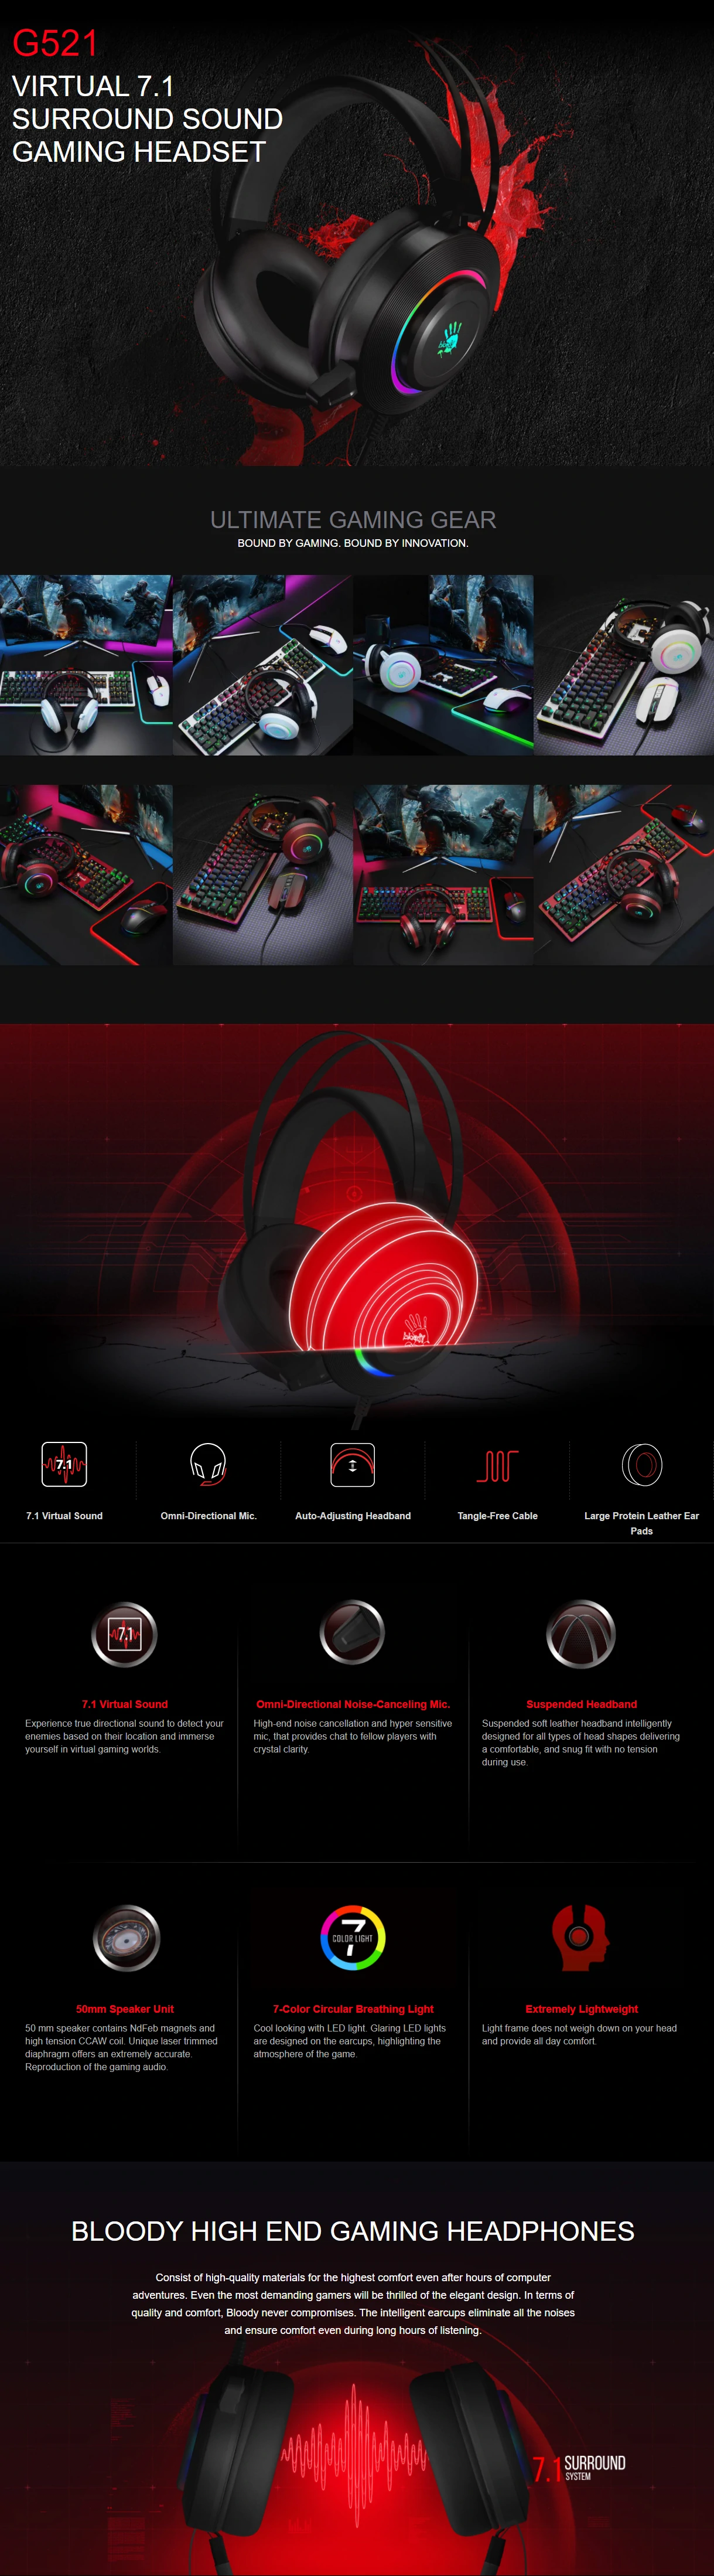 Overview - Bloody - G521 Virtual 7.1 Surround Sound Gaming Headset